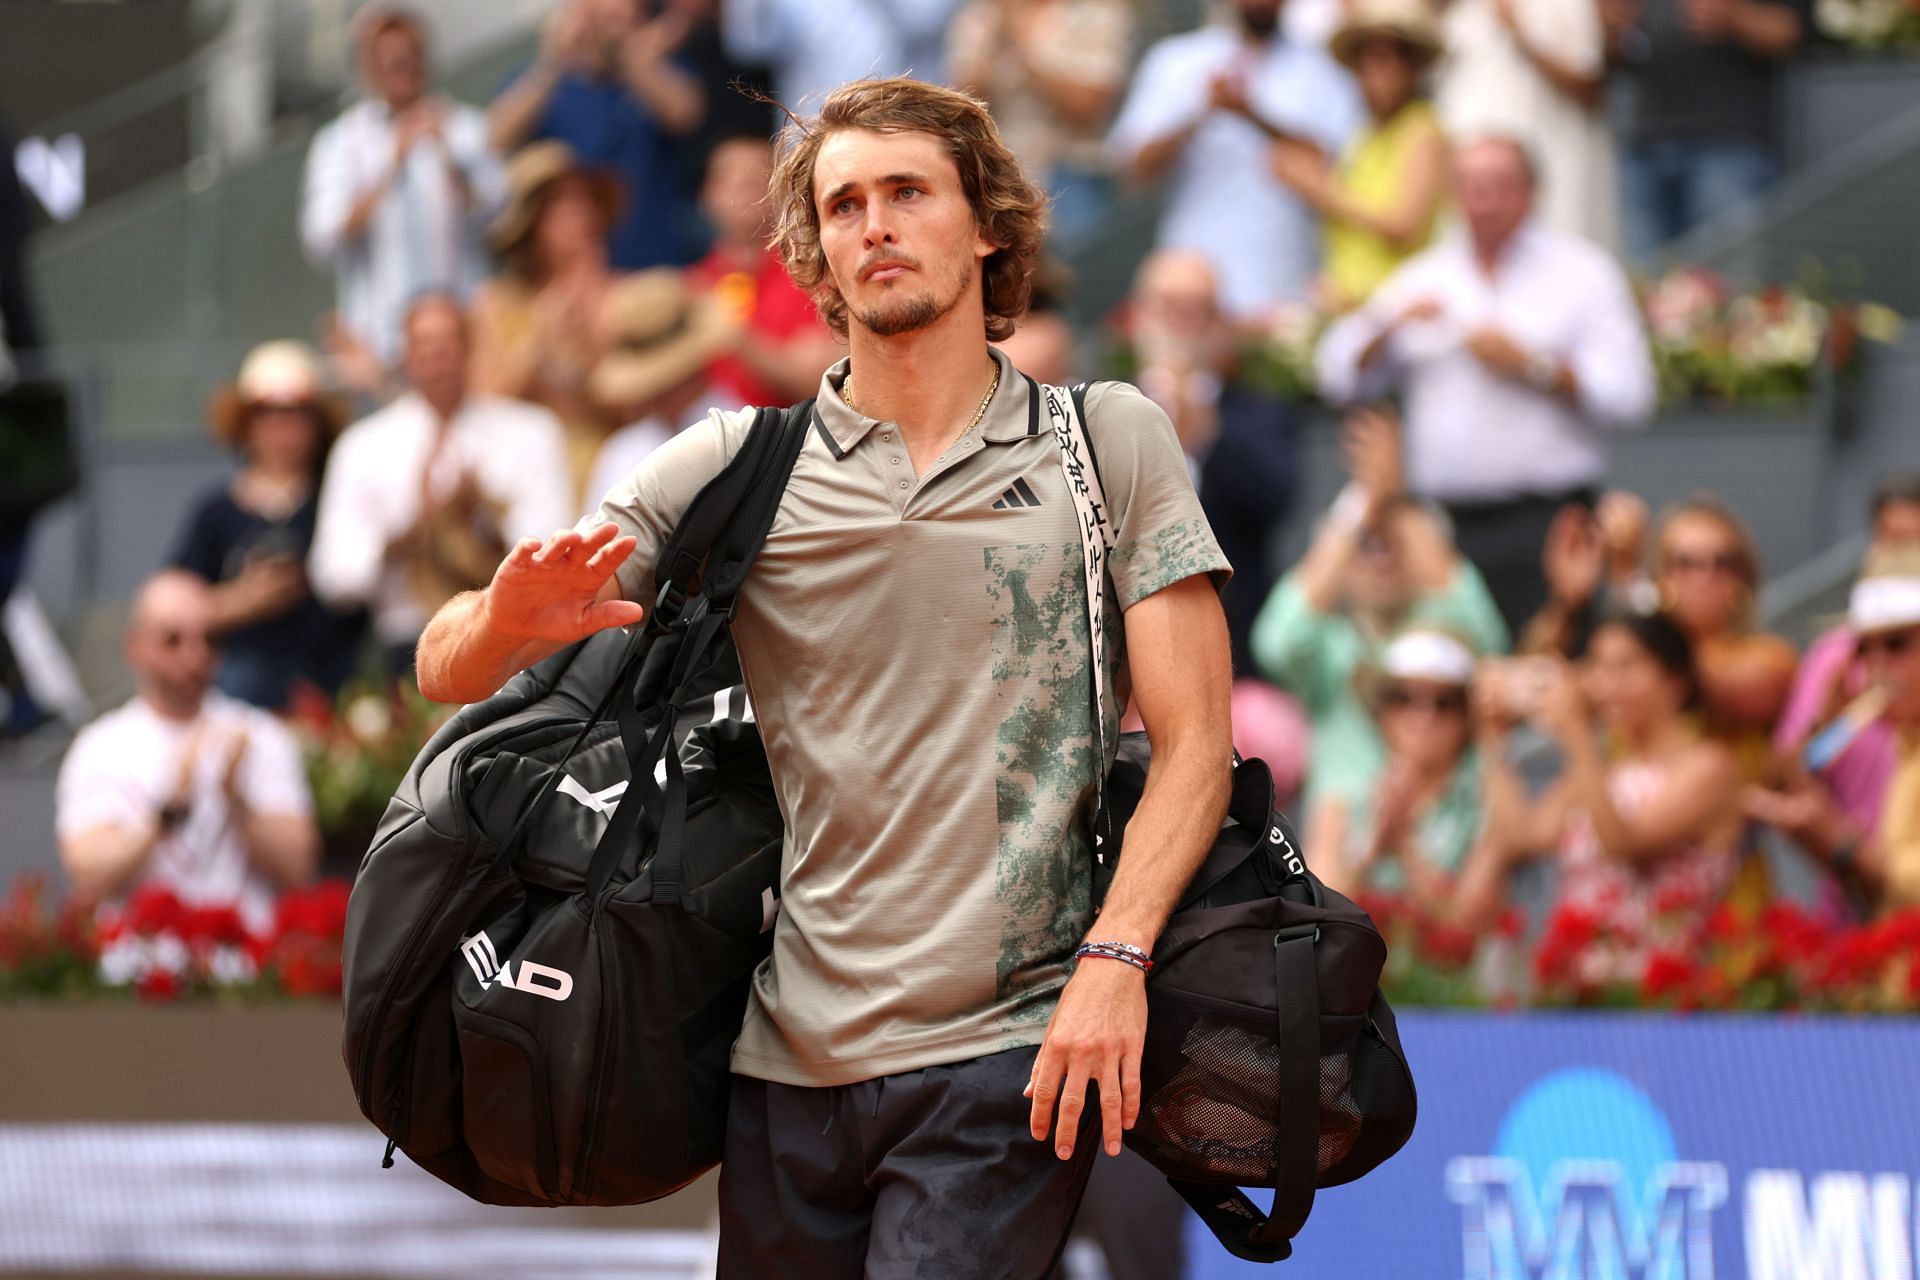 French Open 2023: Alexander Zverev vs Lloyd Harris preview, head-to-head, prediction, odds and pick | Roland Garros